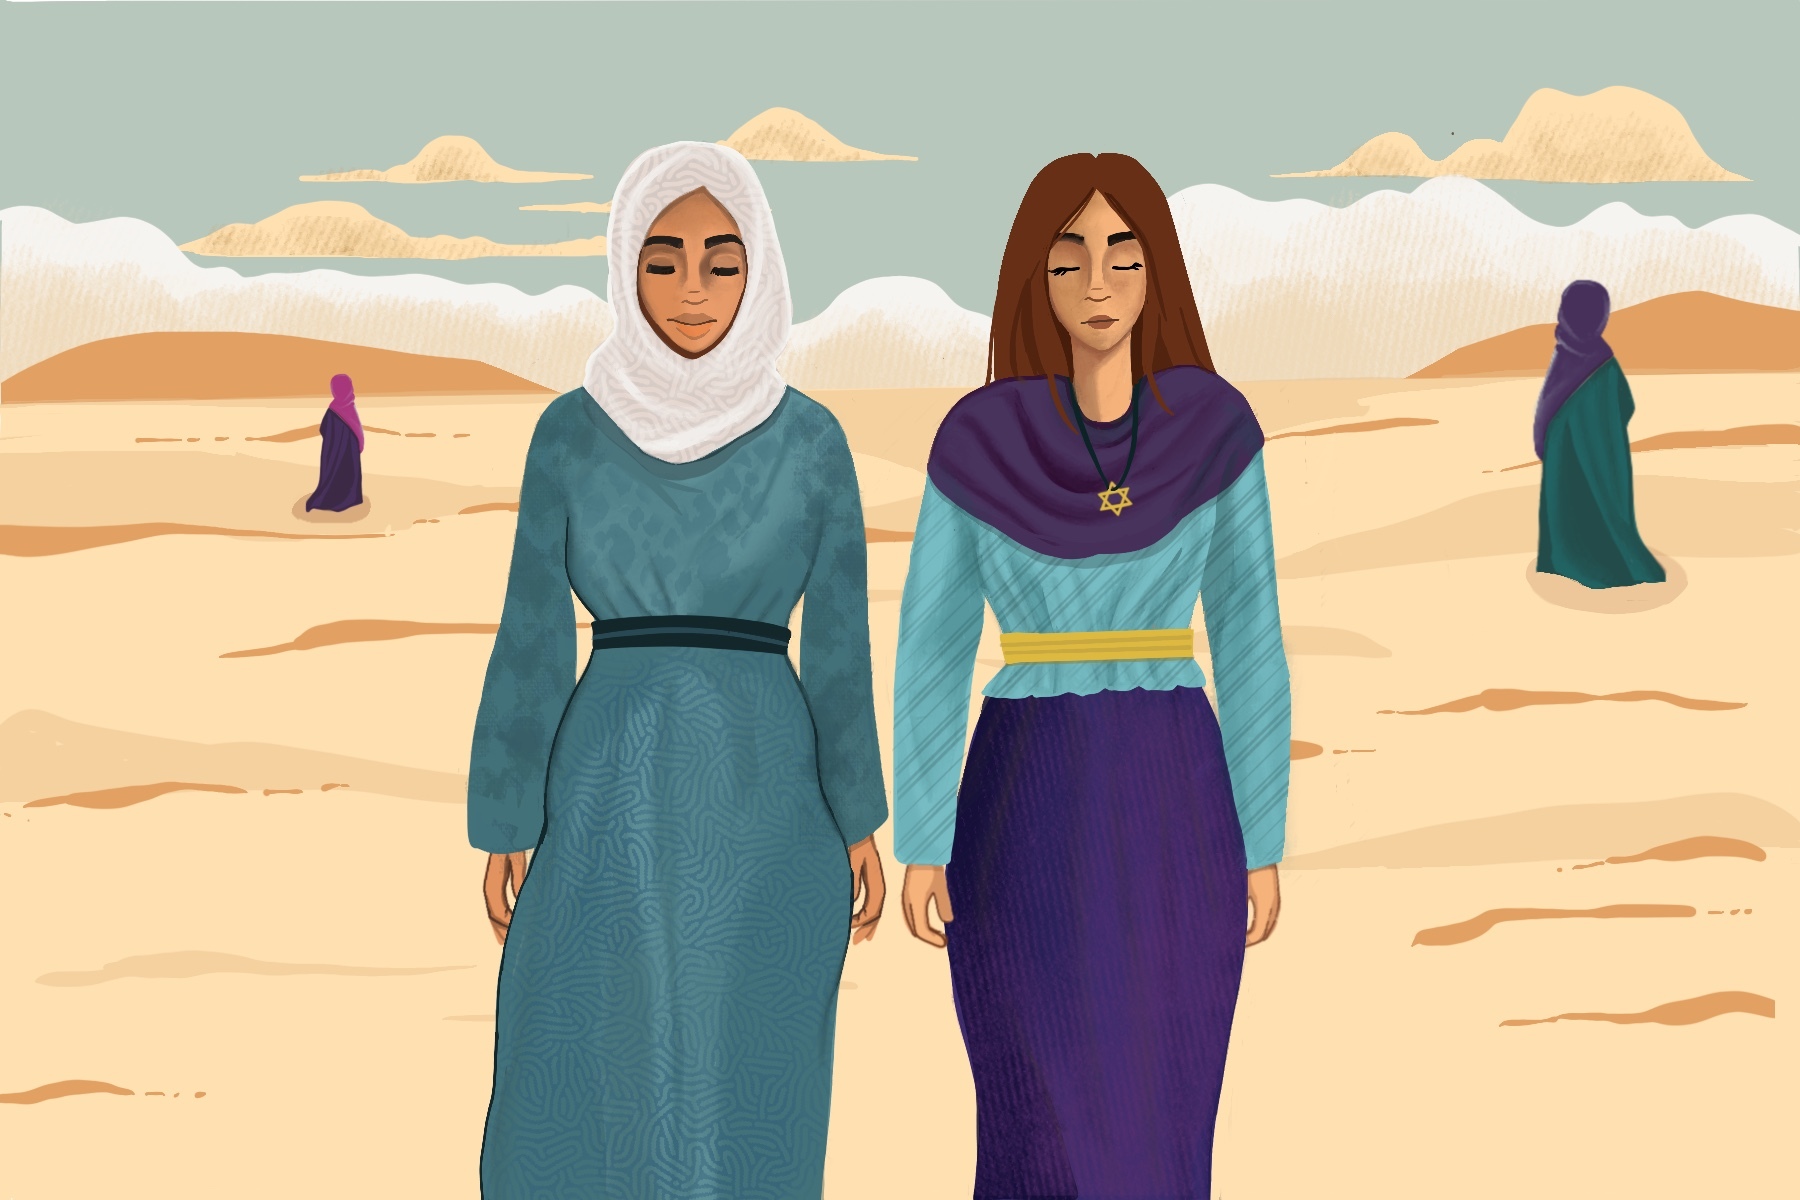 Two solemn, but strong women standing in a surreal environment that appears to be the desert. One wears a hijab and the other wears a star of David.